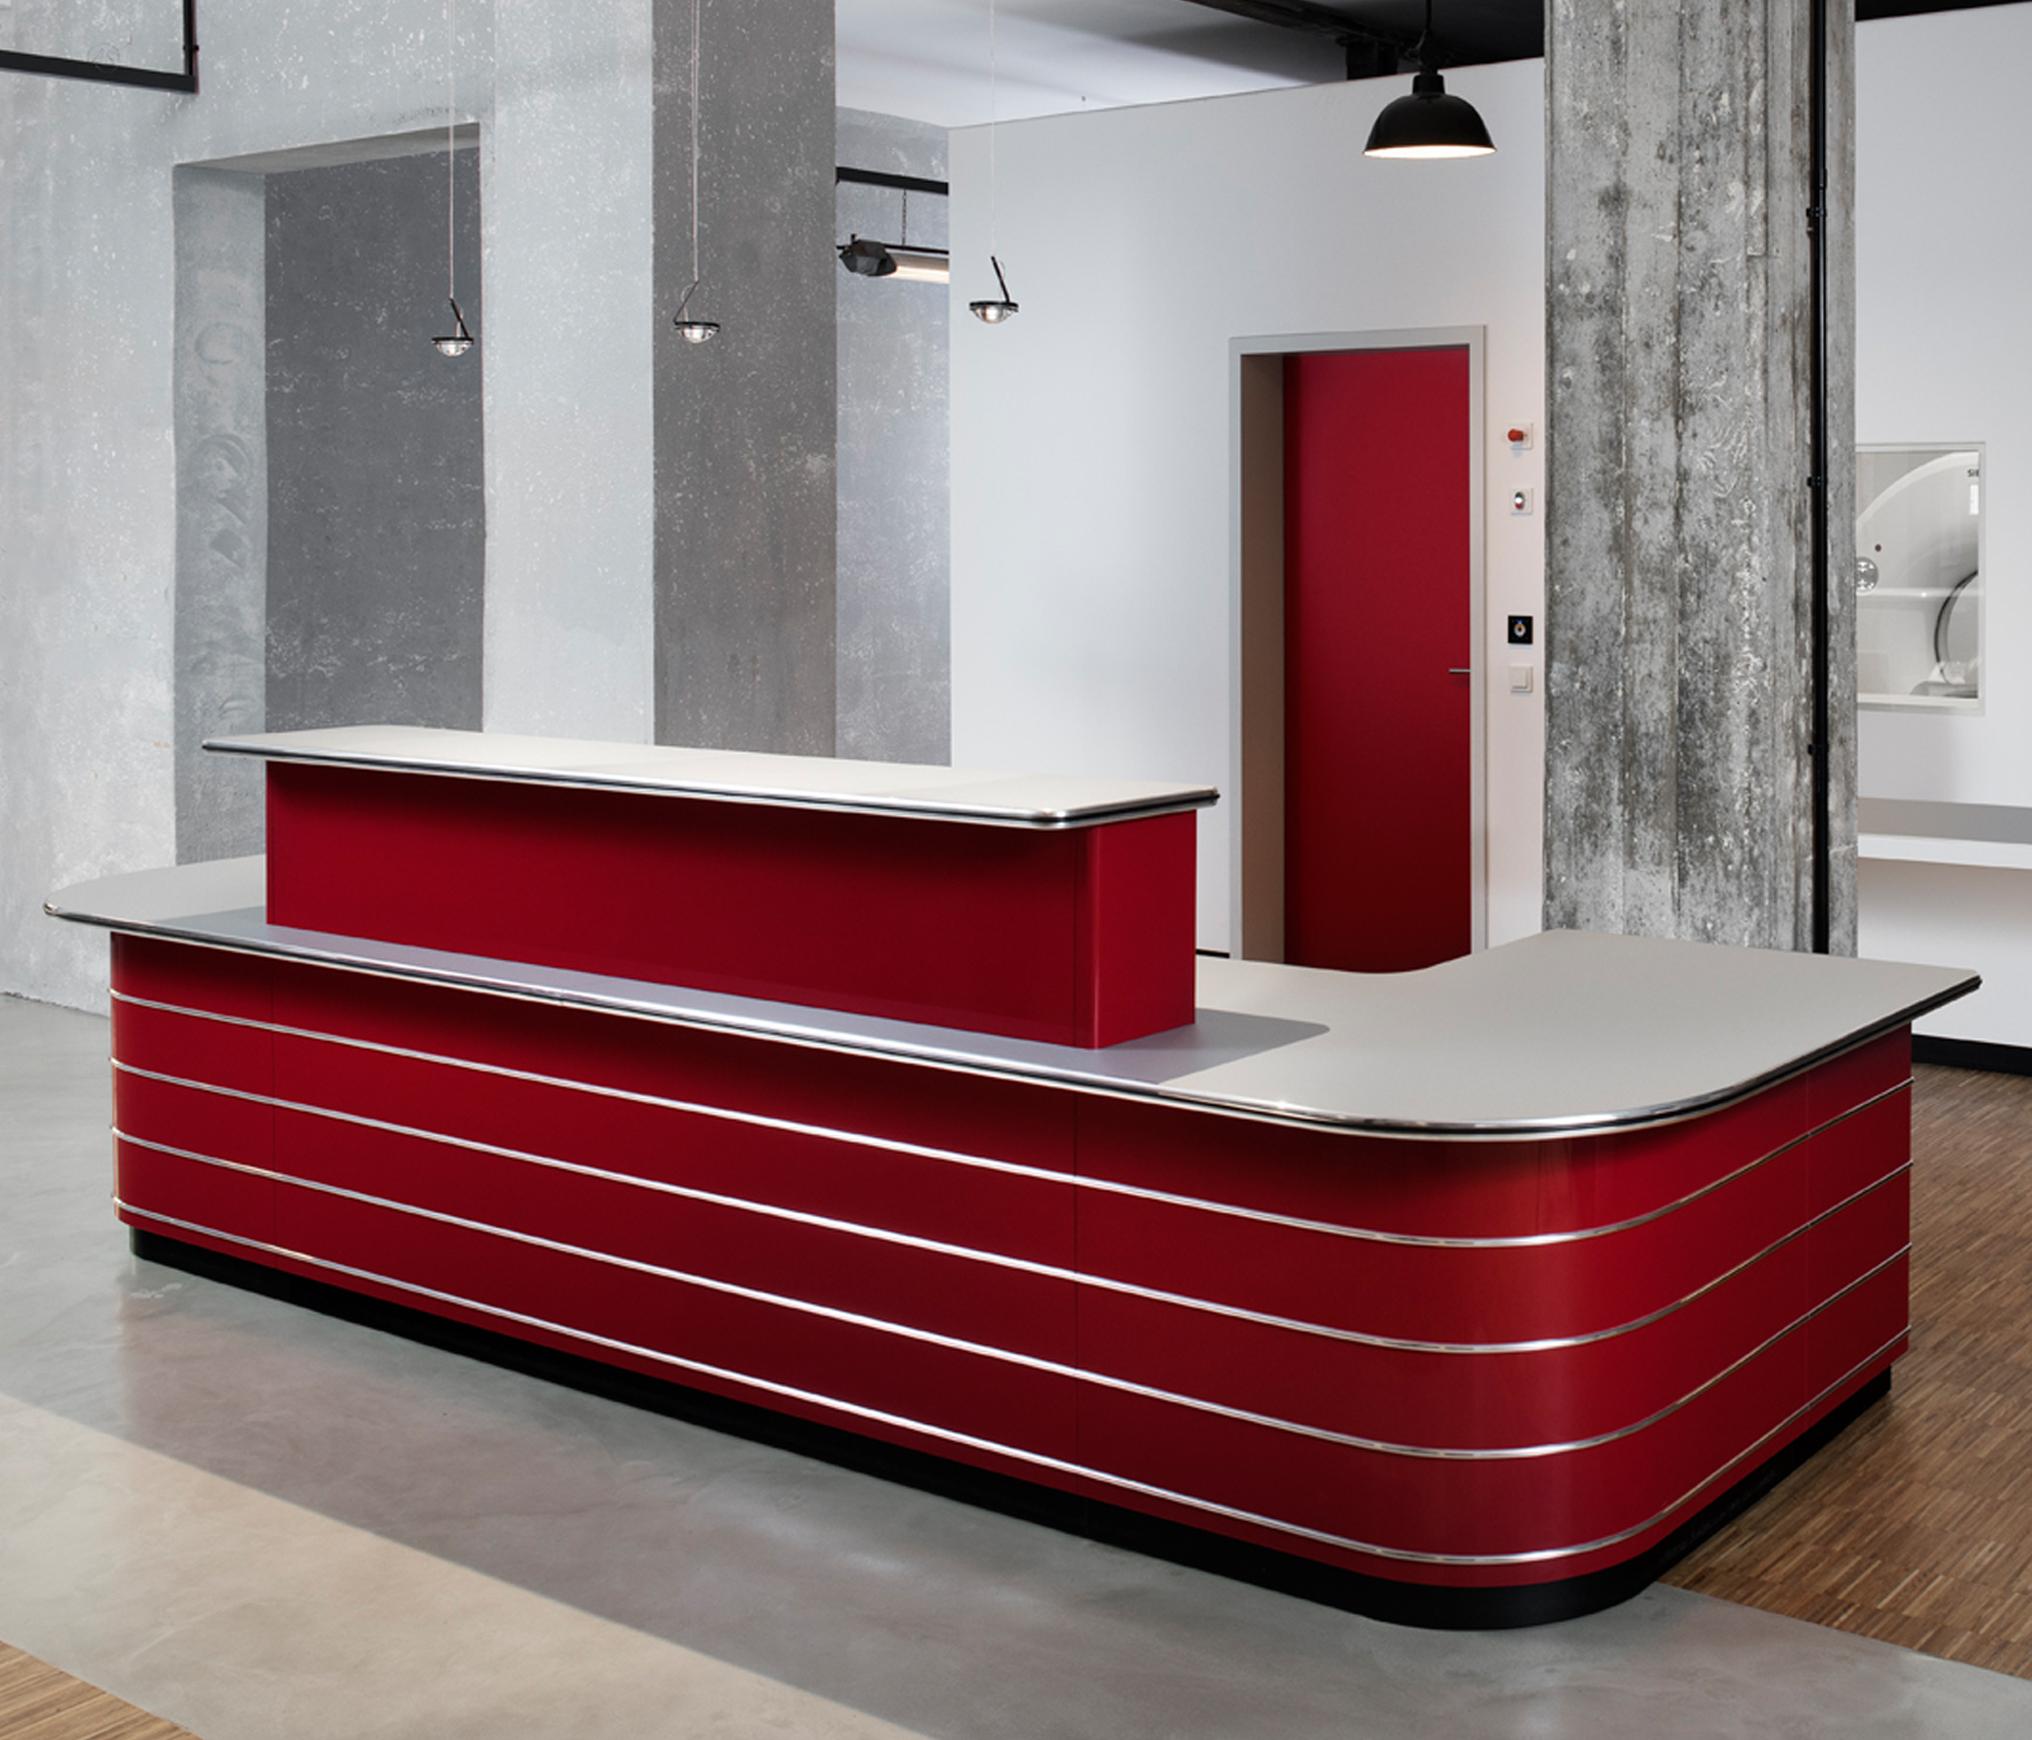 Made to order metal reception counter with rounded corners. The counter is made in lacquered metal and available in various dimensions, layouts and finishes. Delivery time 11-12 weeks.